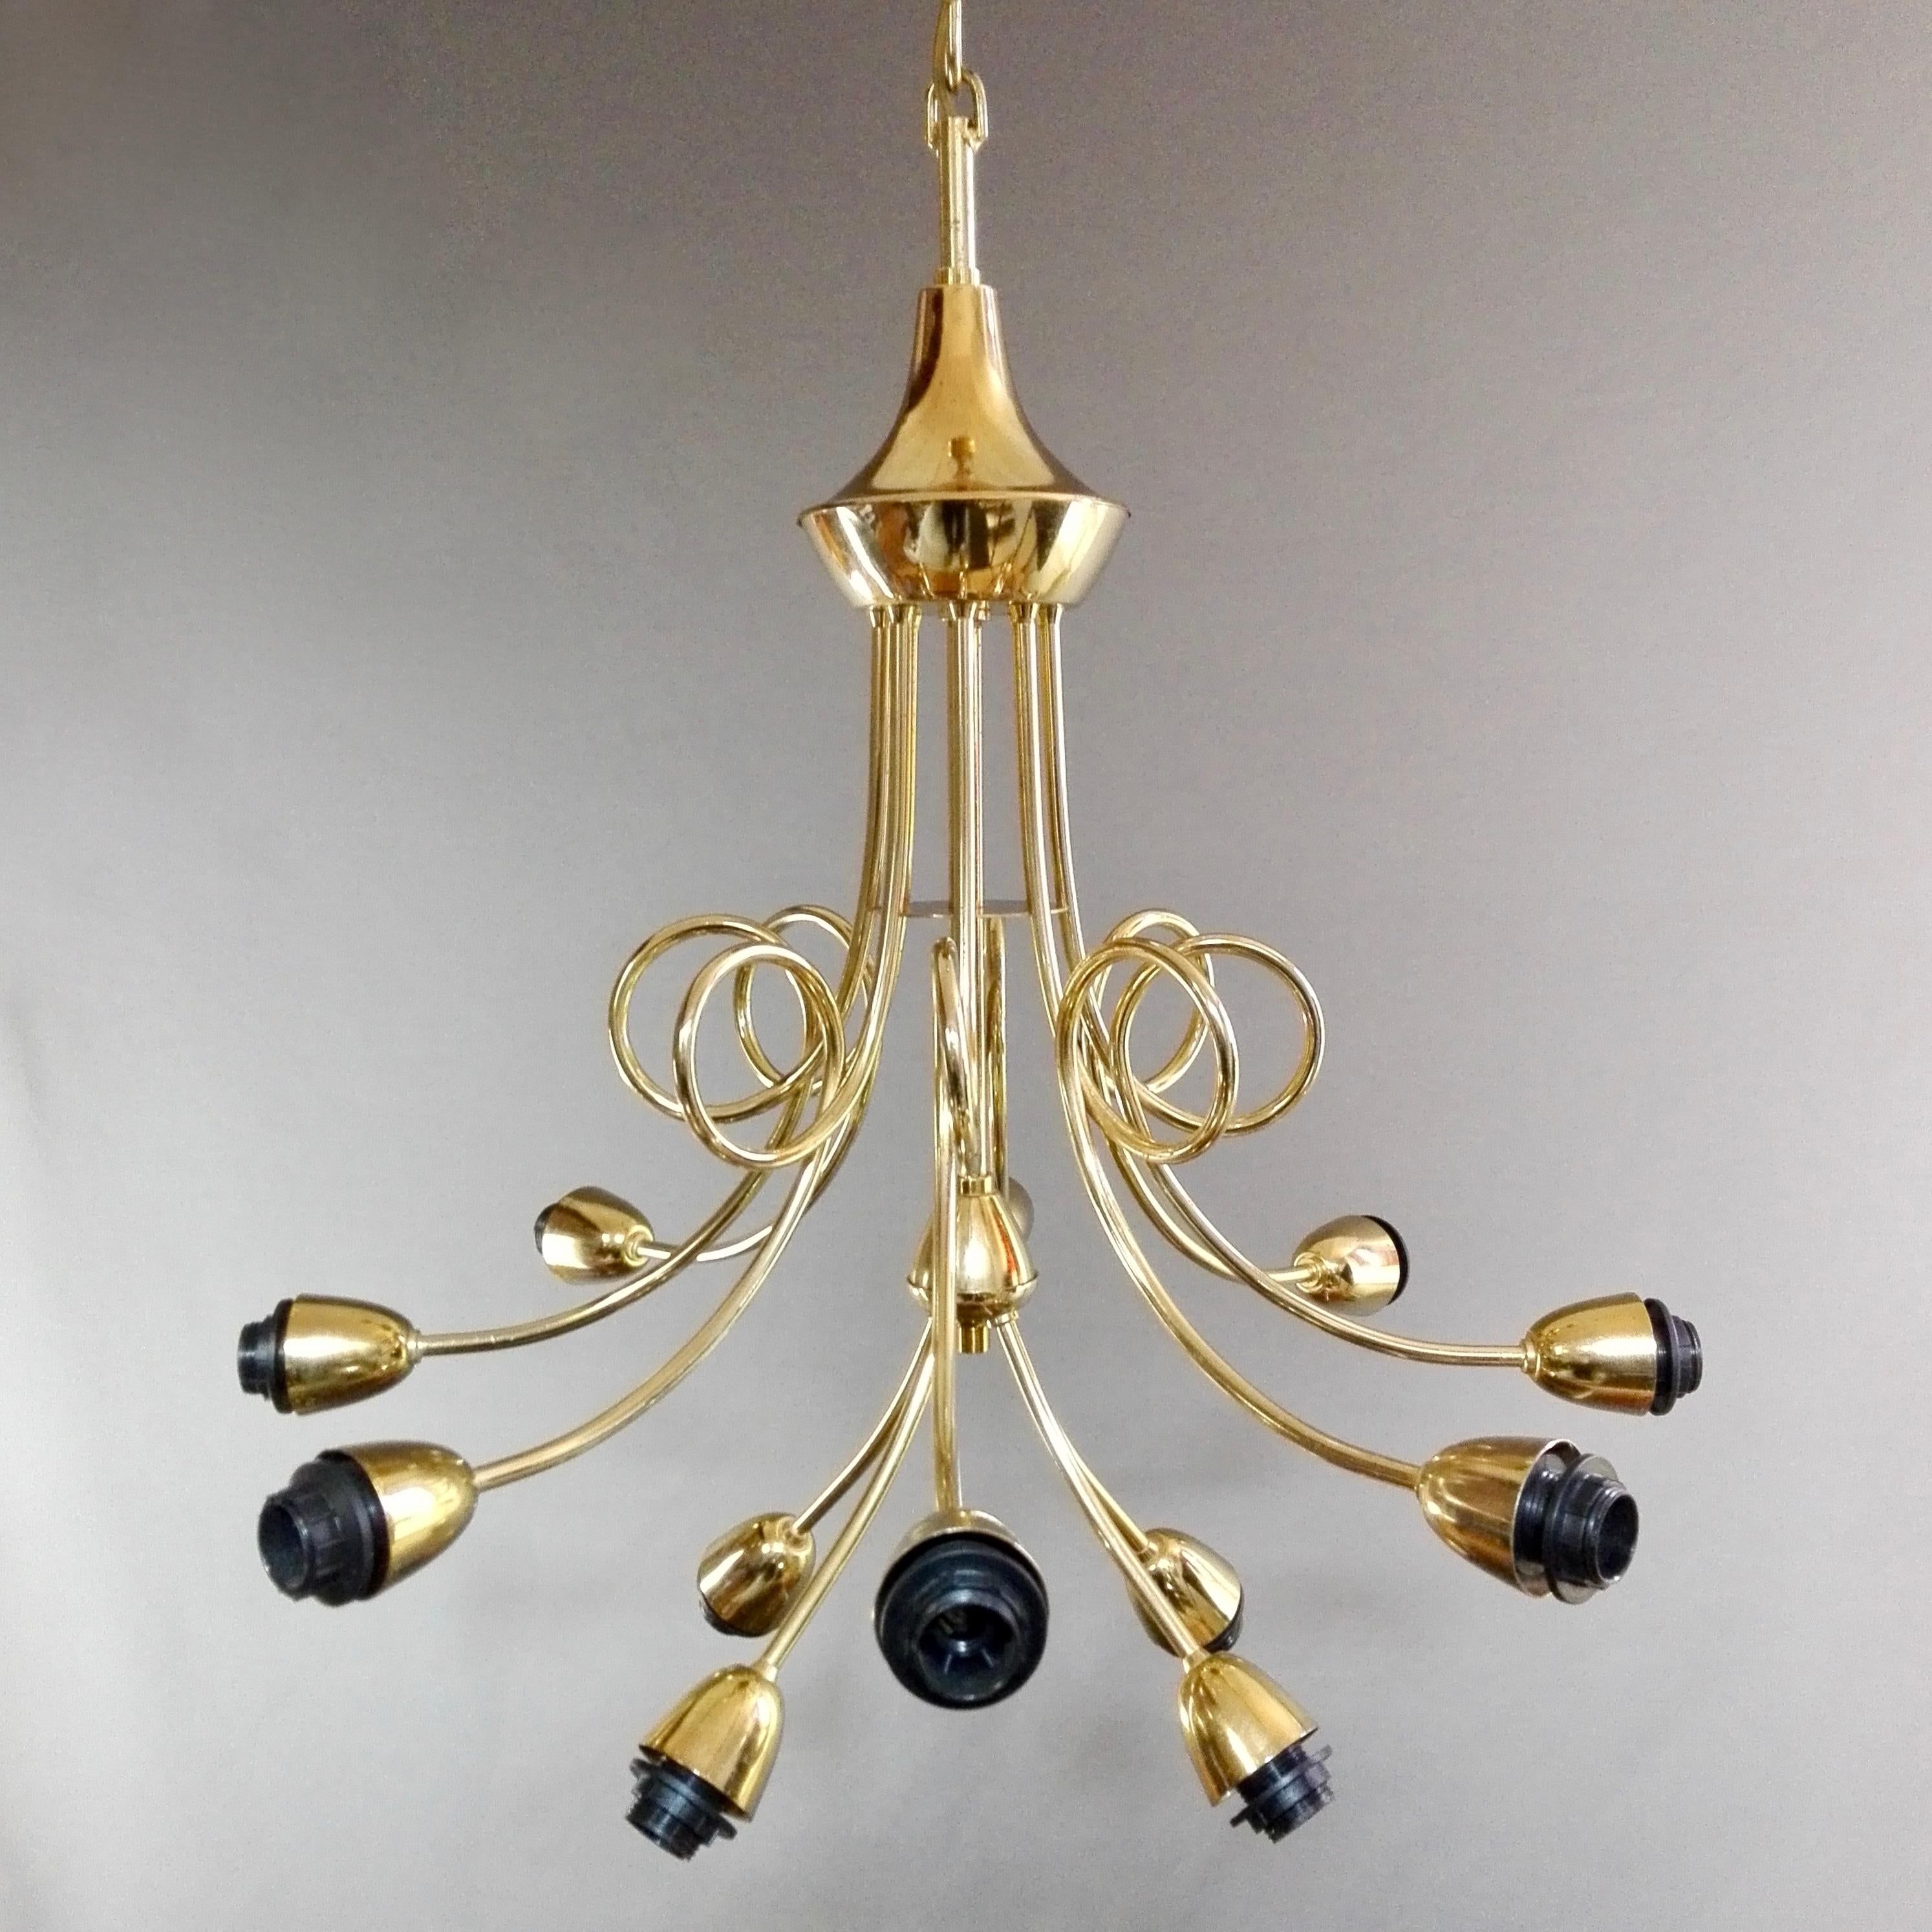 1960s Mazzega Twelve-Light Chandelier with Flower-Shaped Murano Art Glass Shades For Sale 3